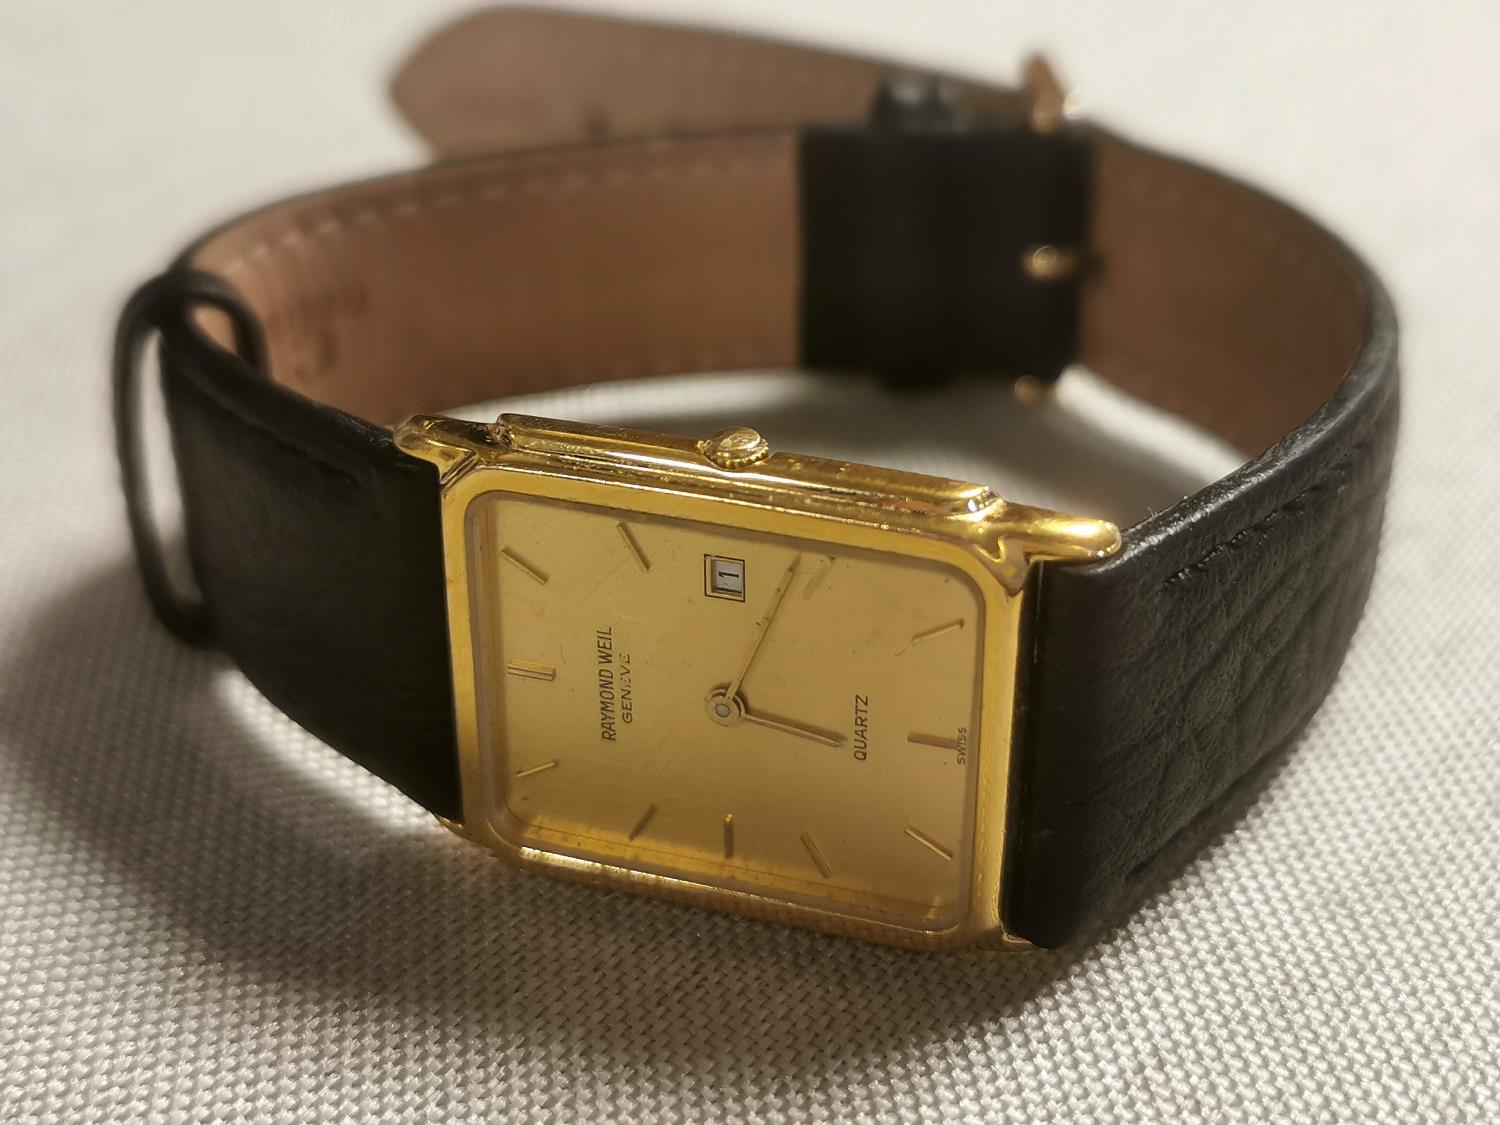 Raymond Weil 18ct Gold Plated Wristwatch - Image 2 of 3